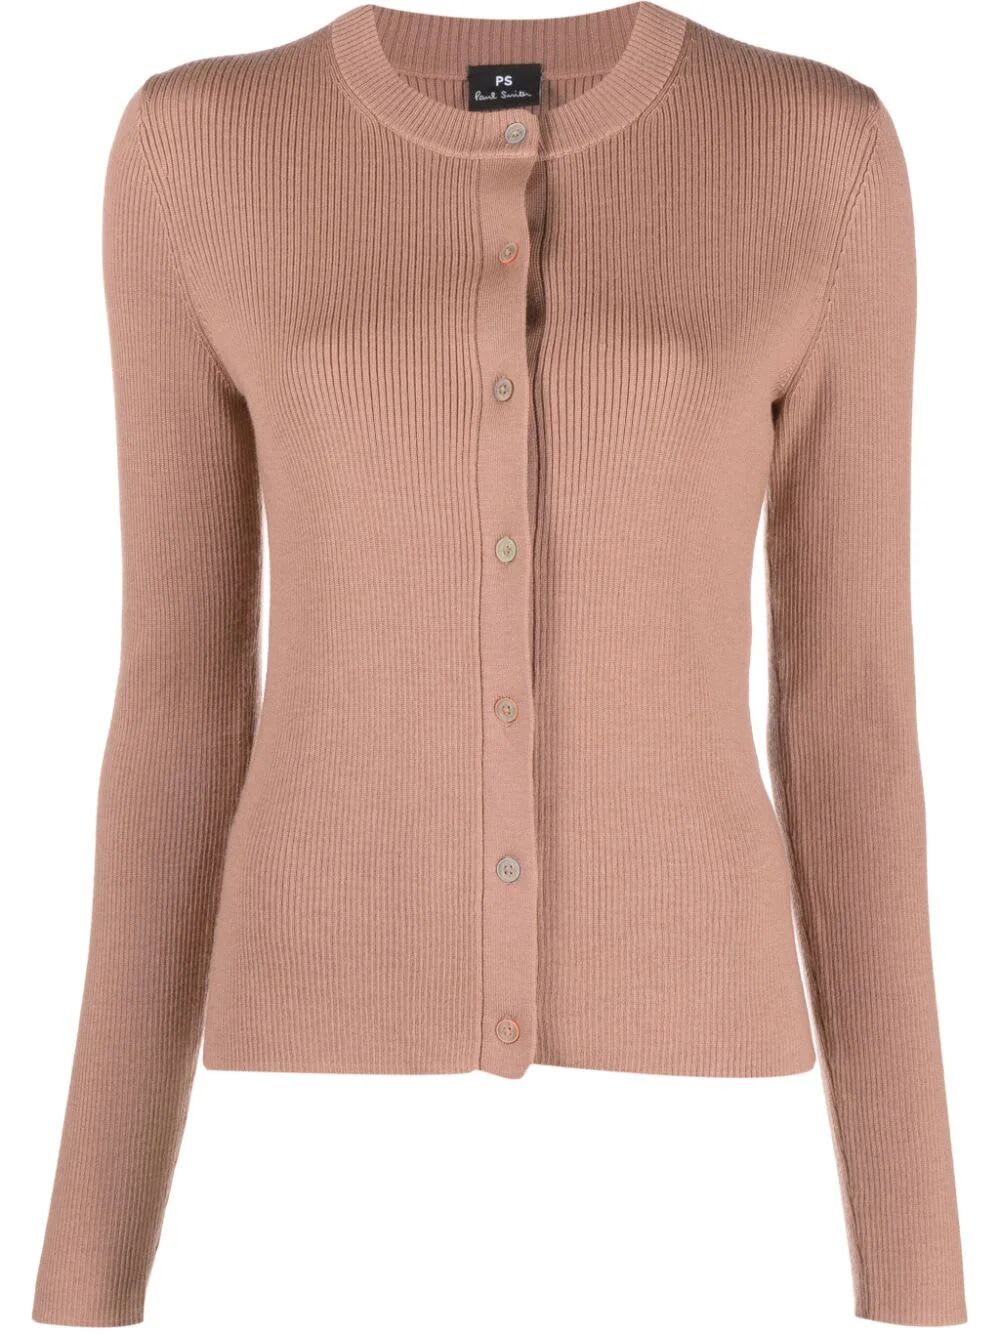 Shop Ps By Paul Smith Knitted Buttoned Cardigan In Tan